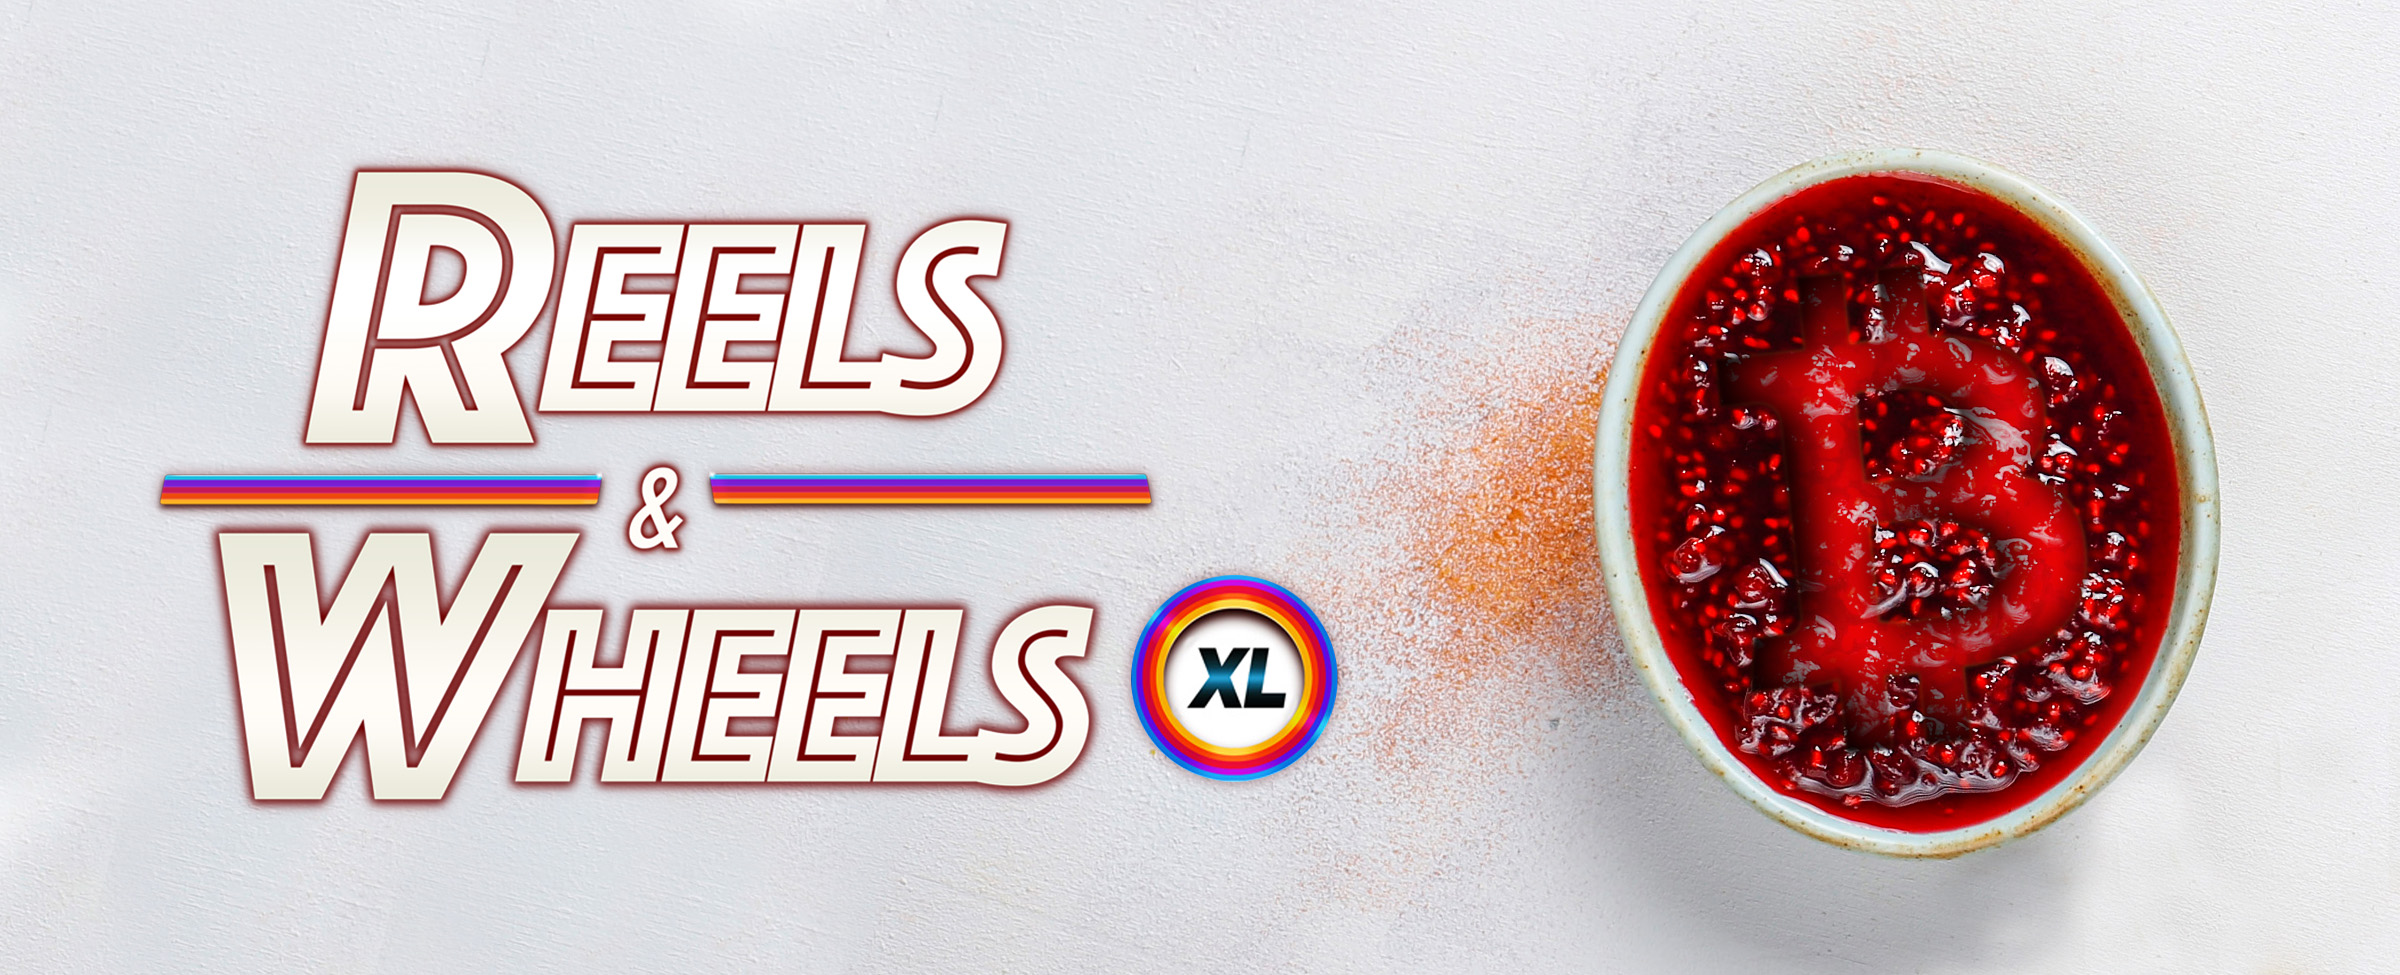 The logo from the Cafe Casino slot game, Reels and Wheels XL, is pictured on the left of the image, hovering above an off-white table surface. To its right sits a coffee mug filled with a red liquid, stamped with a large letter B in the style of Bitcoin.